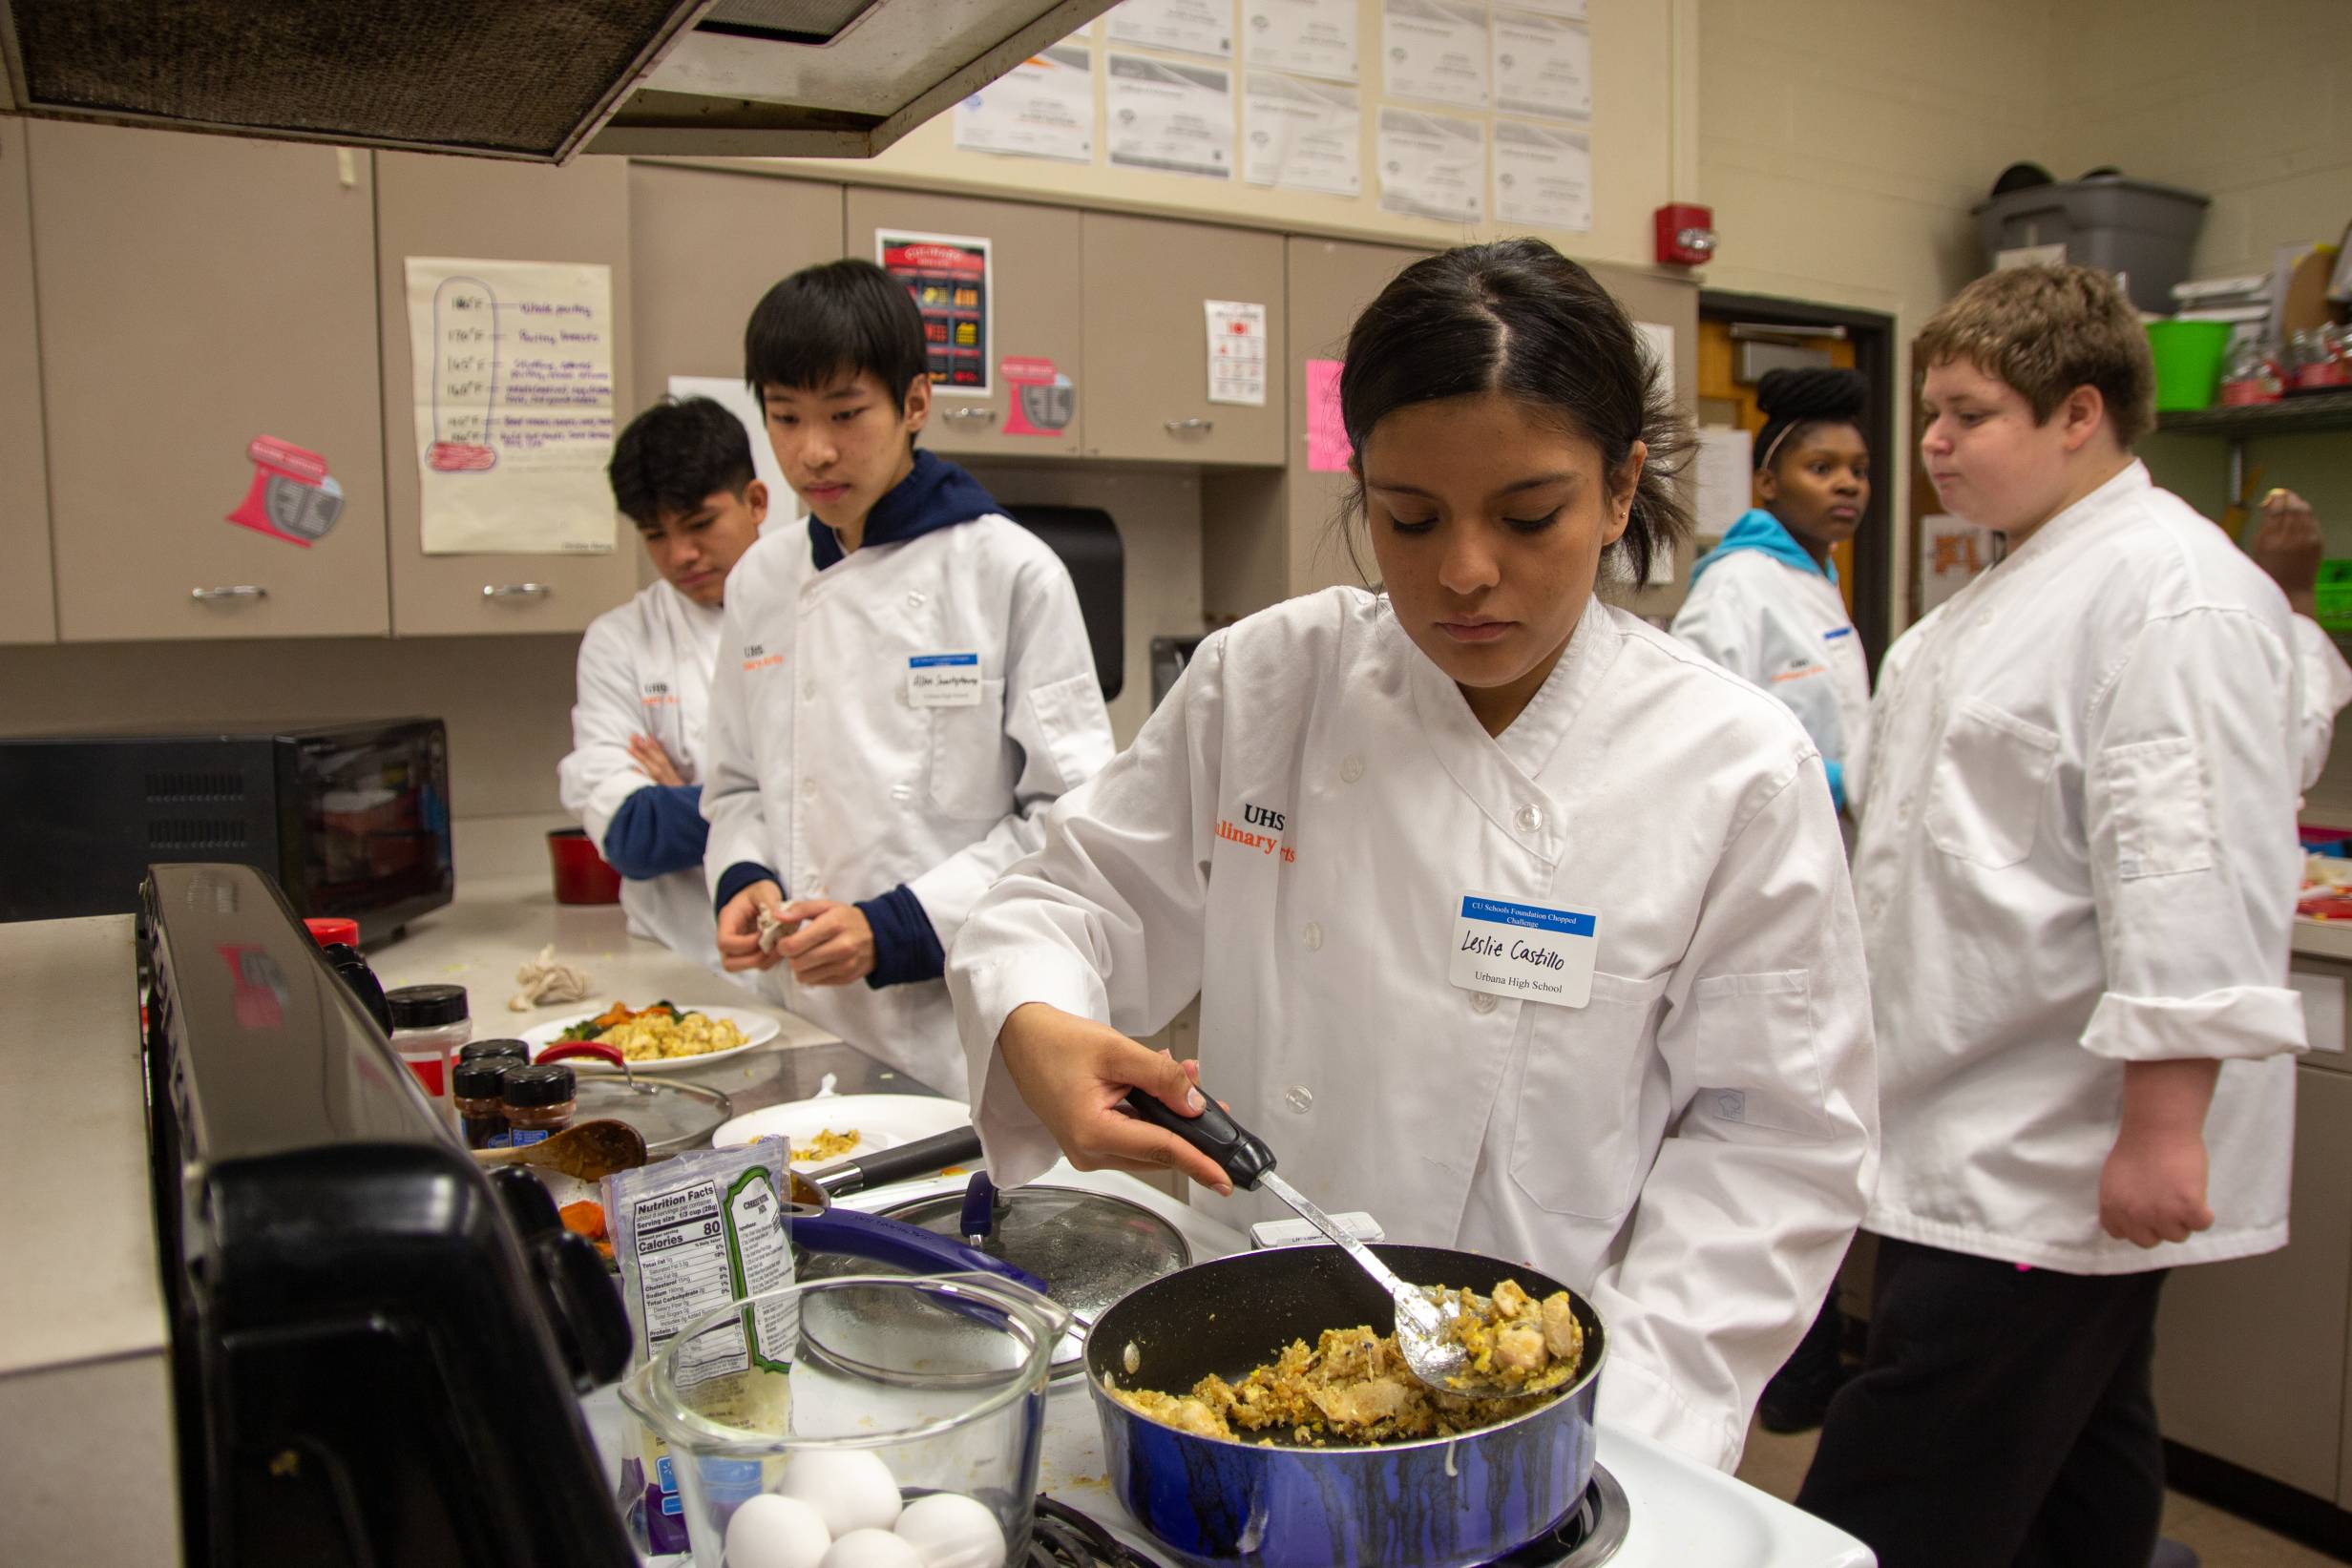 Check out some photos from CU Schools Foundation’s “Chopped Challenge”